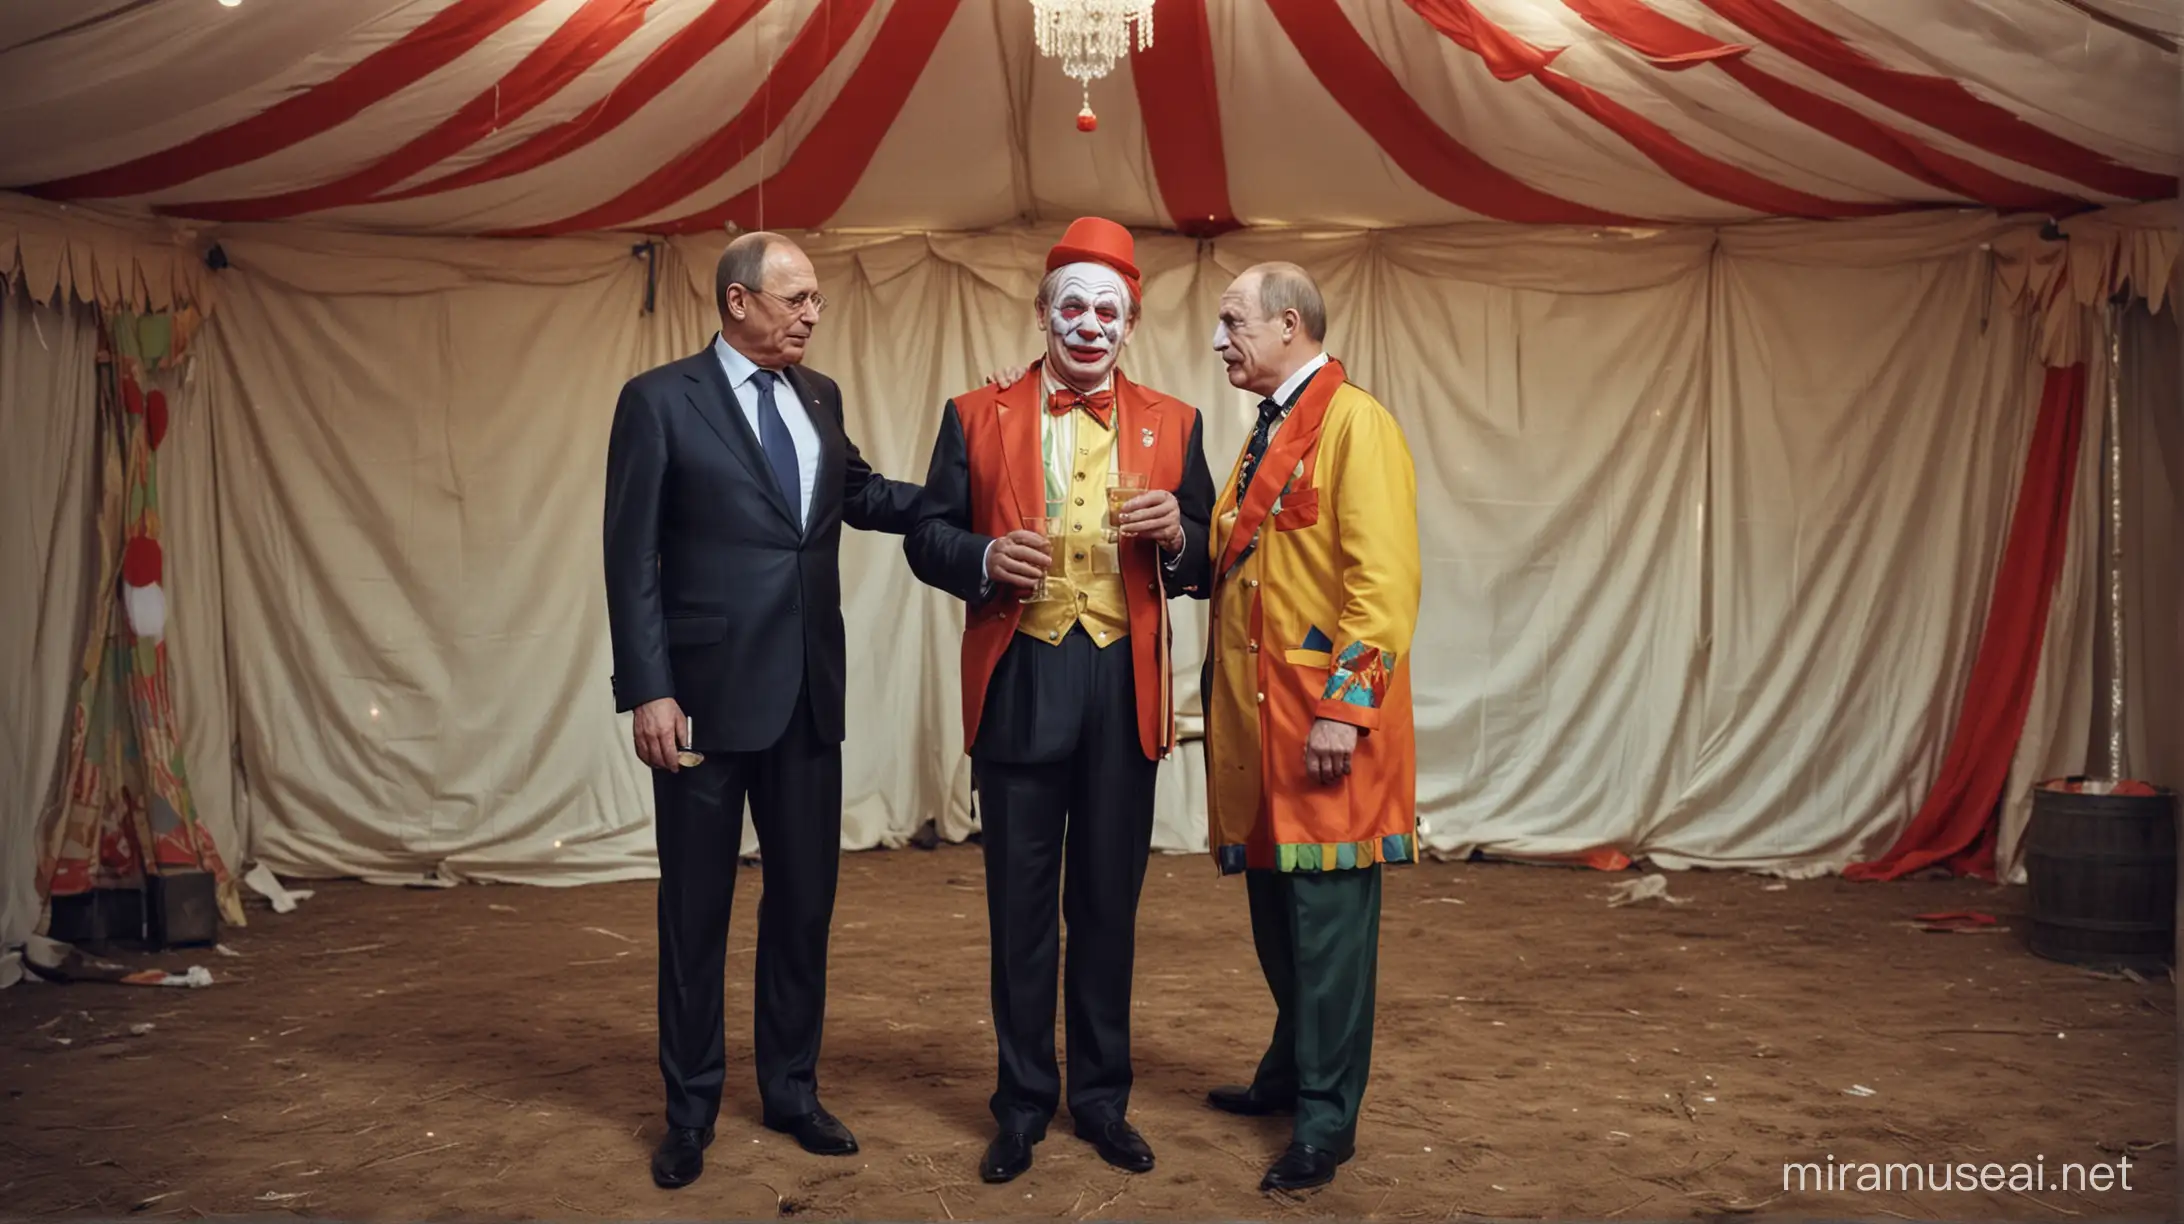 Lavrov and Vladimir Putin, dressed up as clowns. Standing next to each other, sad, sorrowful, drinking alcohol, vokda. Circus tent.